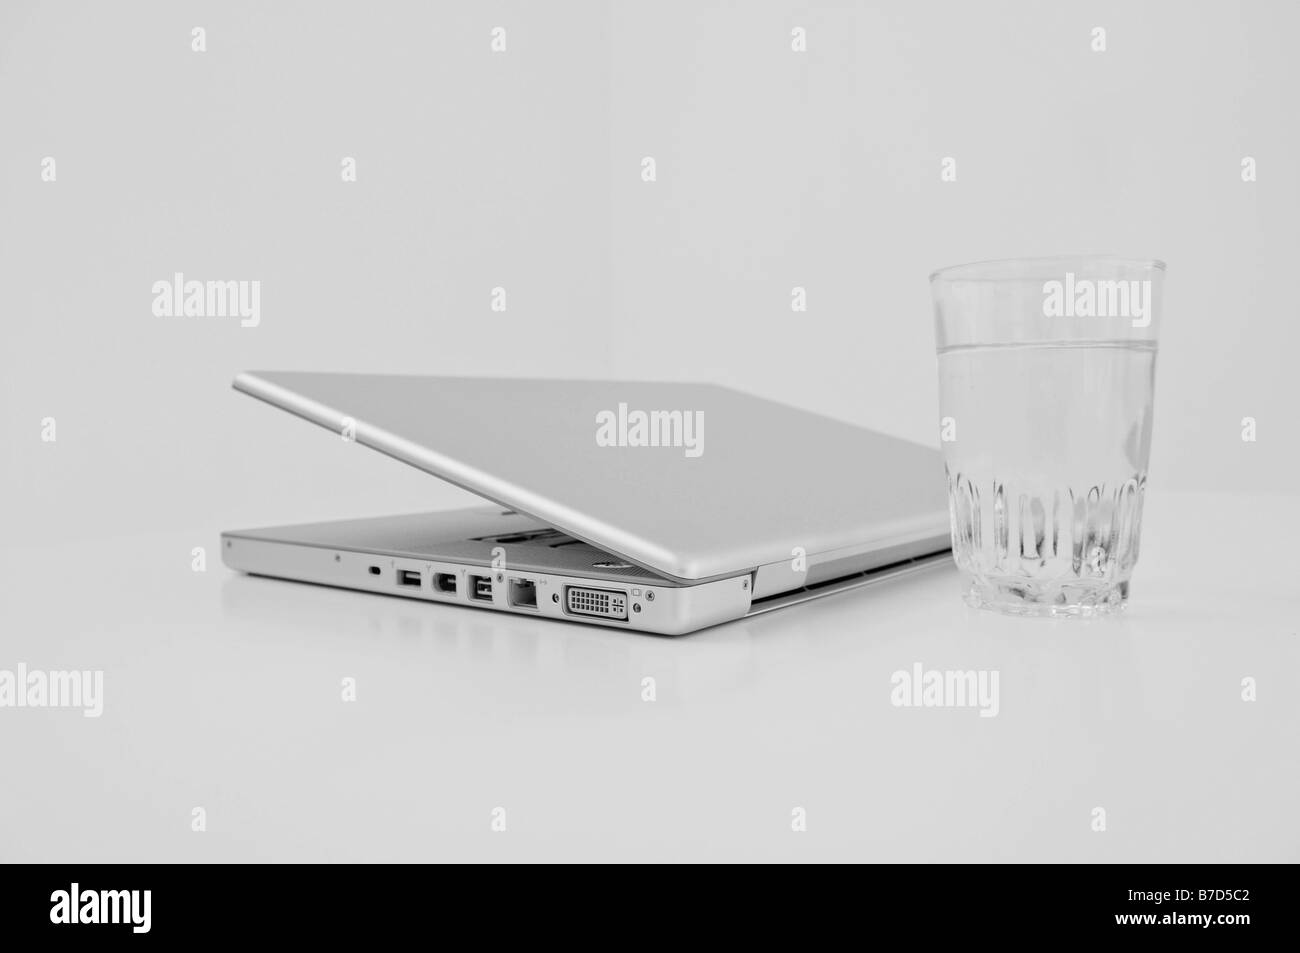 A laptop and a glass of water. Stock Photo